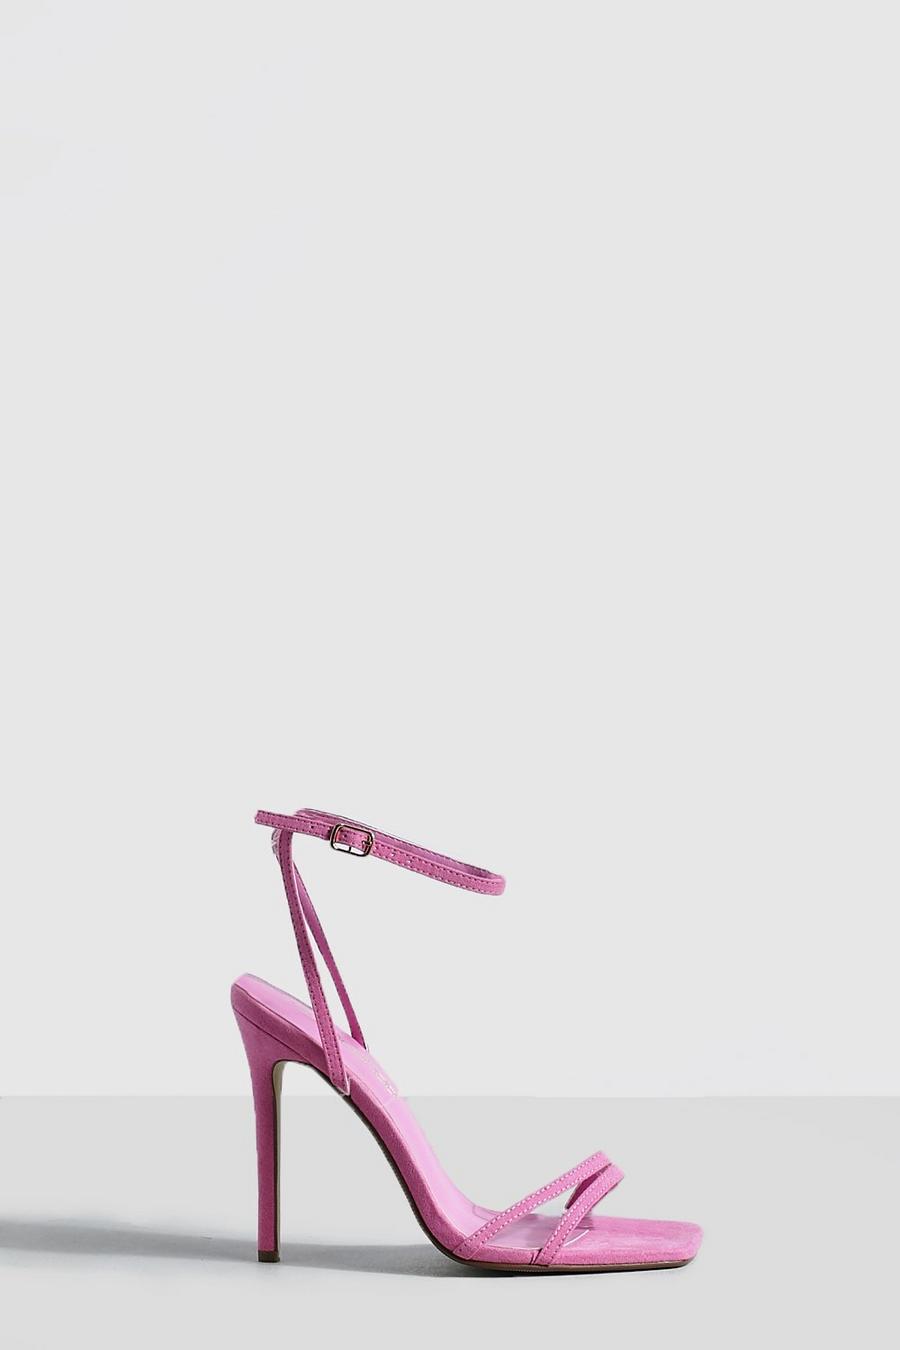 Neon-pink rosa Double Strap Barely There Stiletto Heels